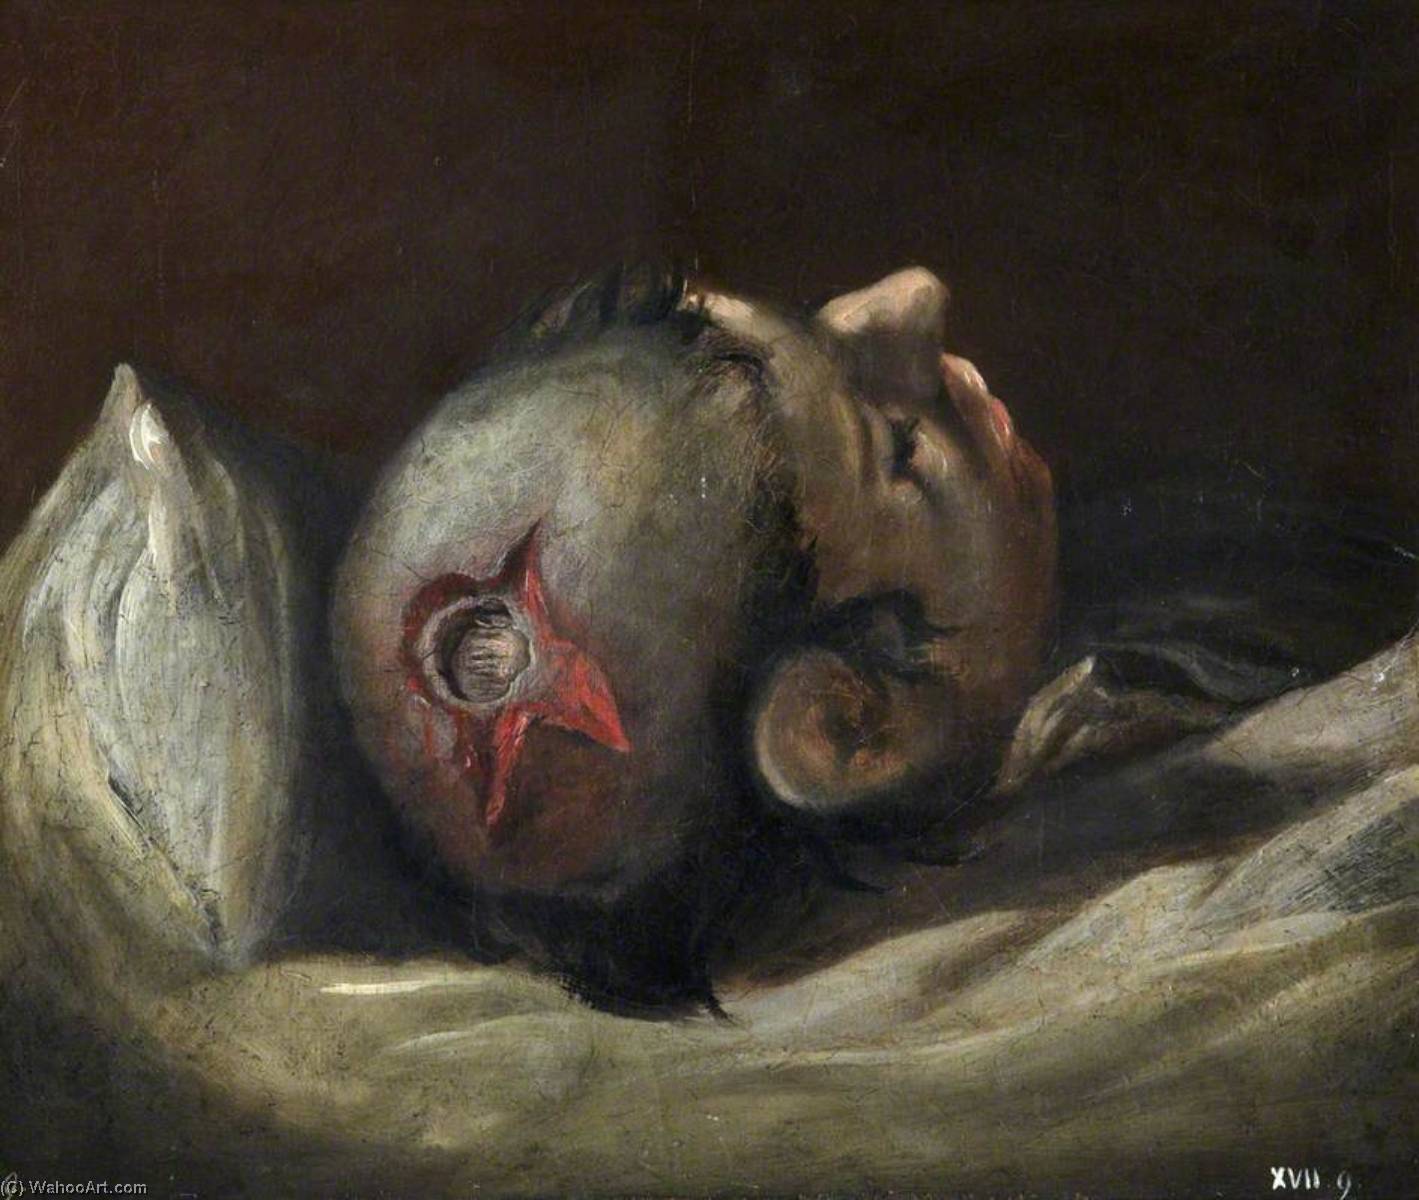 Achat Reproductions D'art The Wounded following the Battle of Corunna Musket Ball Wound of Skull, 1809 de Charles Bell (Inspiré par) (1935-1995, United States) | ArtsDot.com